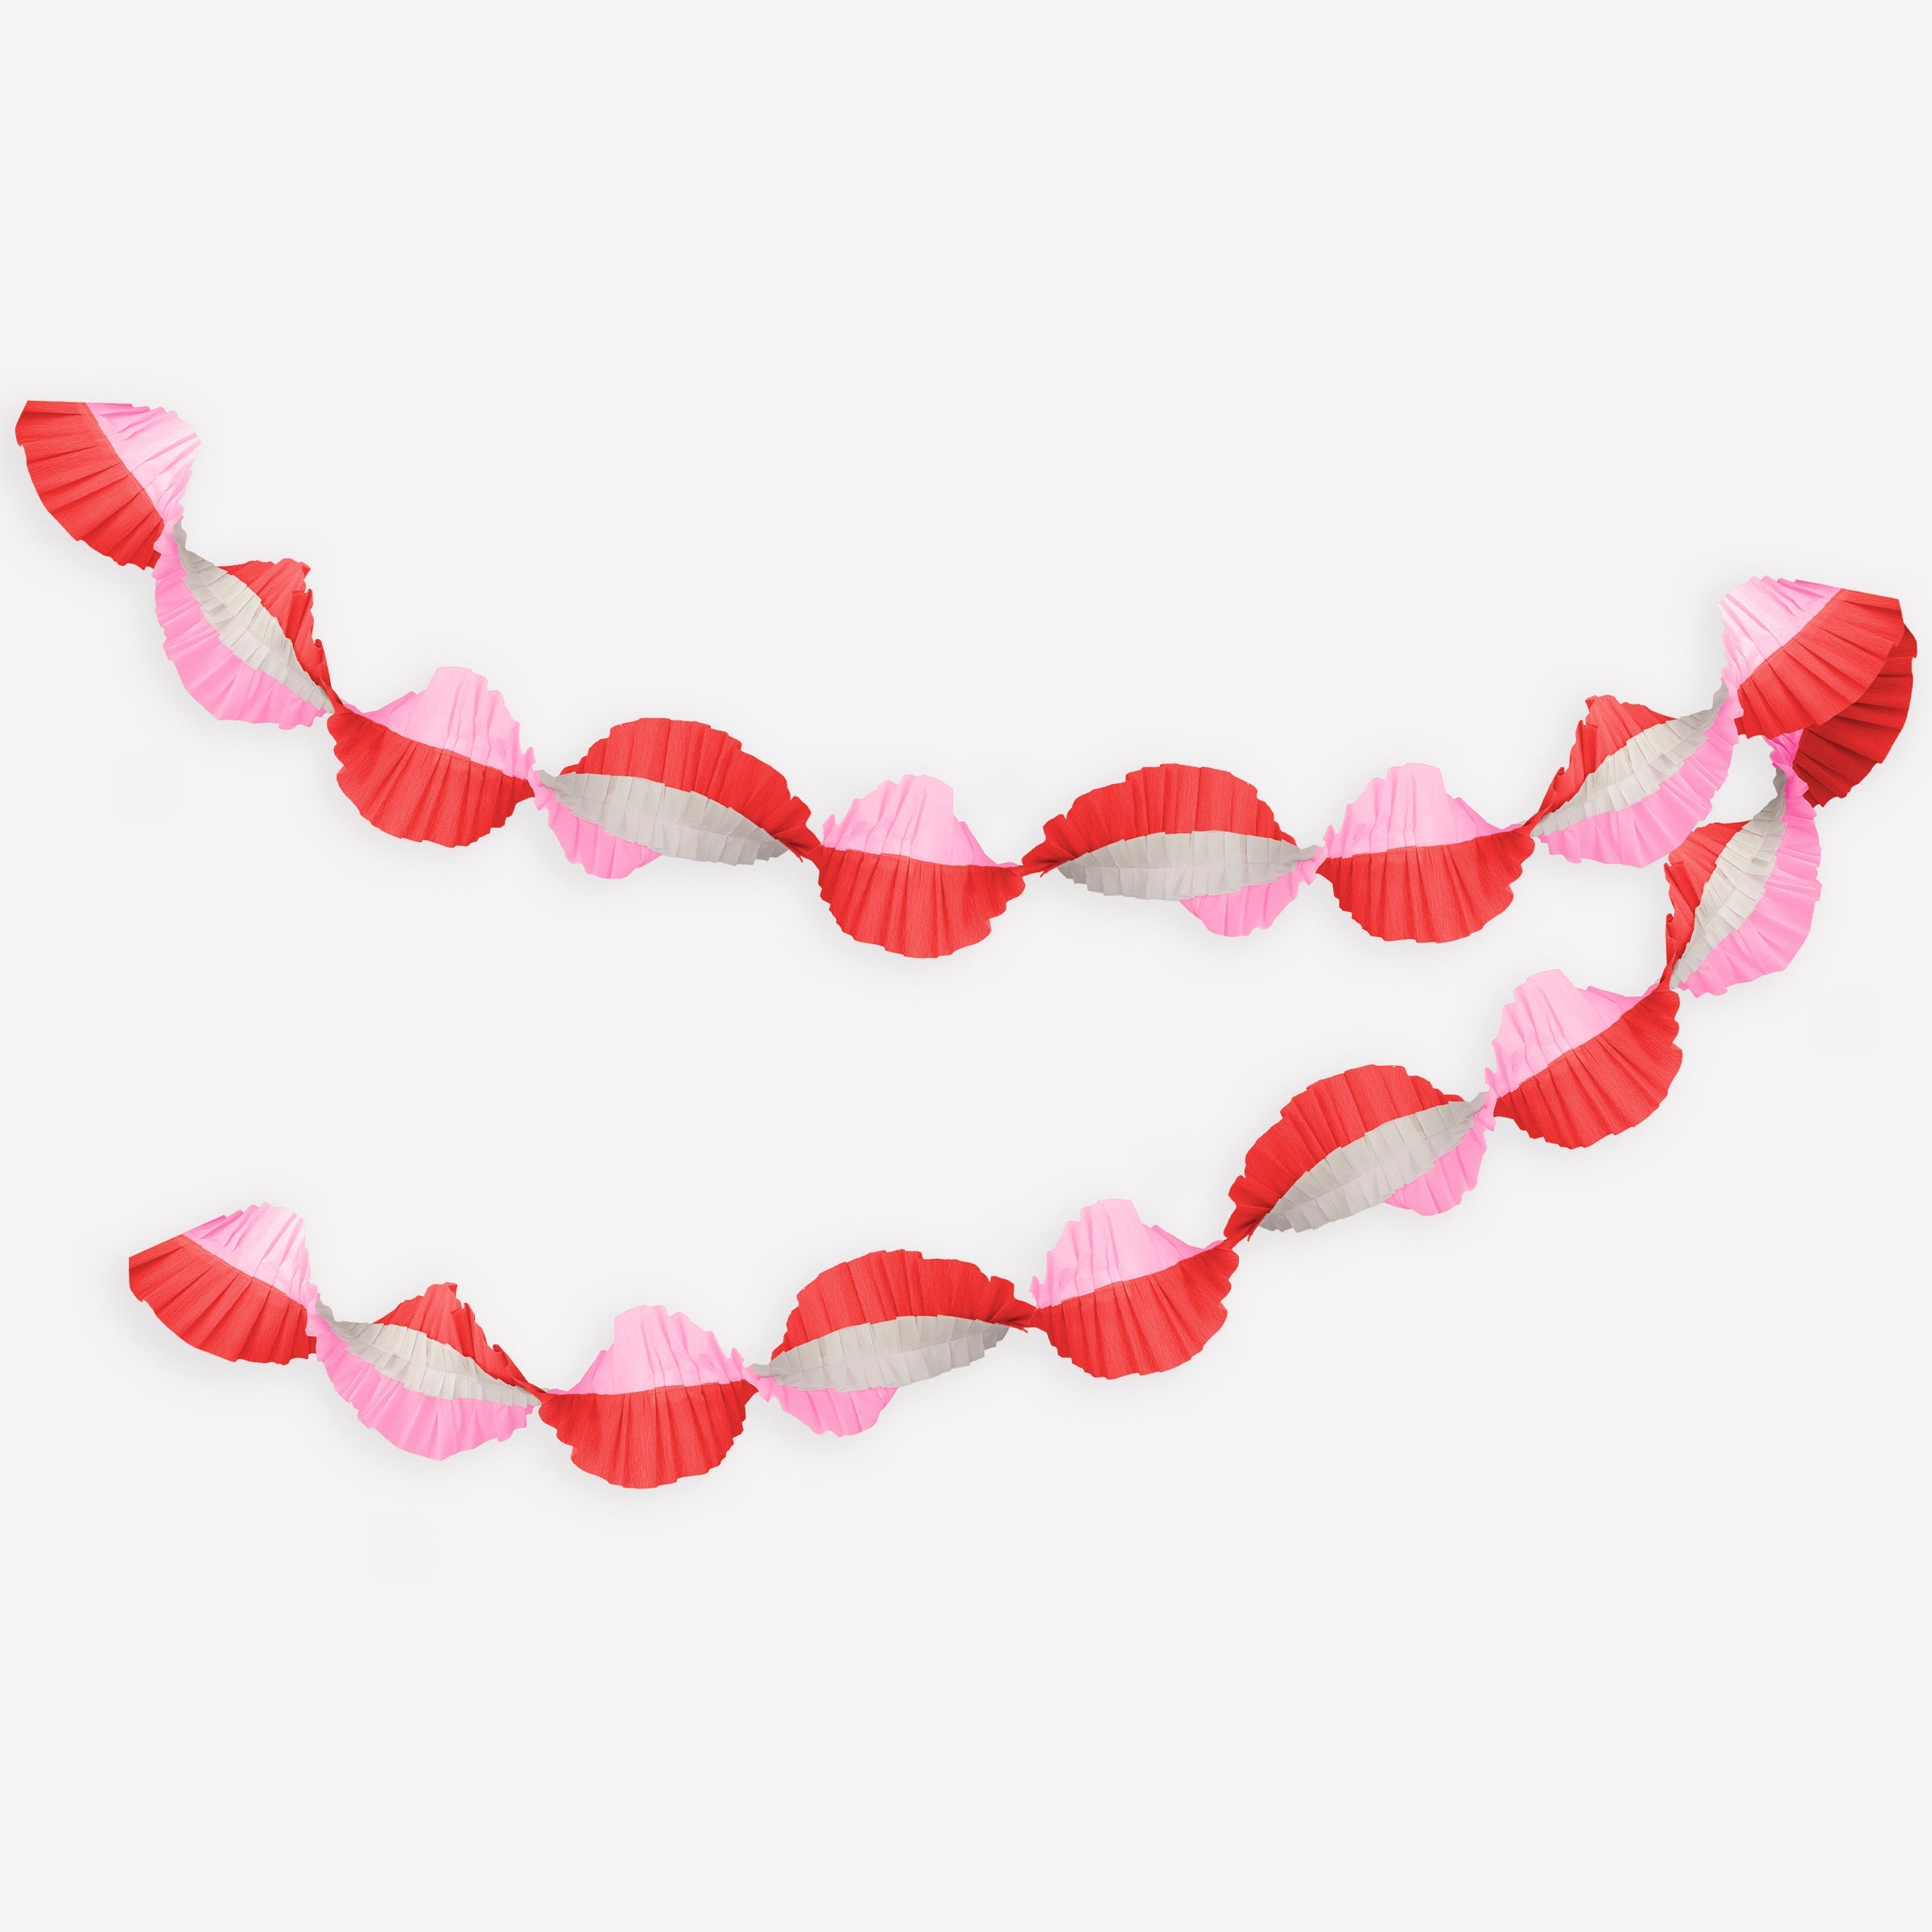 Our party streamer is crafted from pink, red and gold paper perfect for Valentine's Day party decorations.